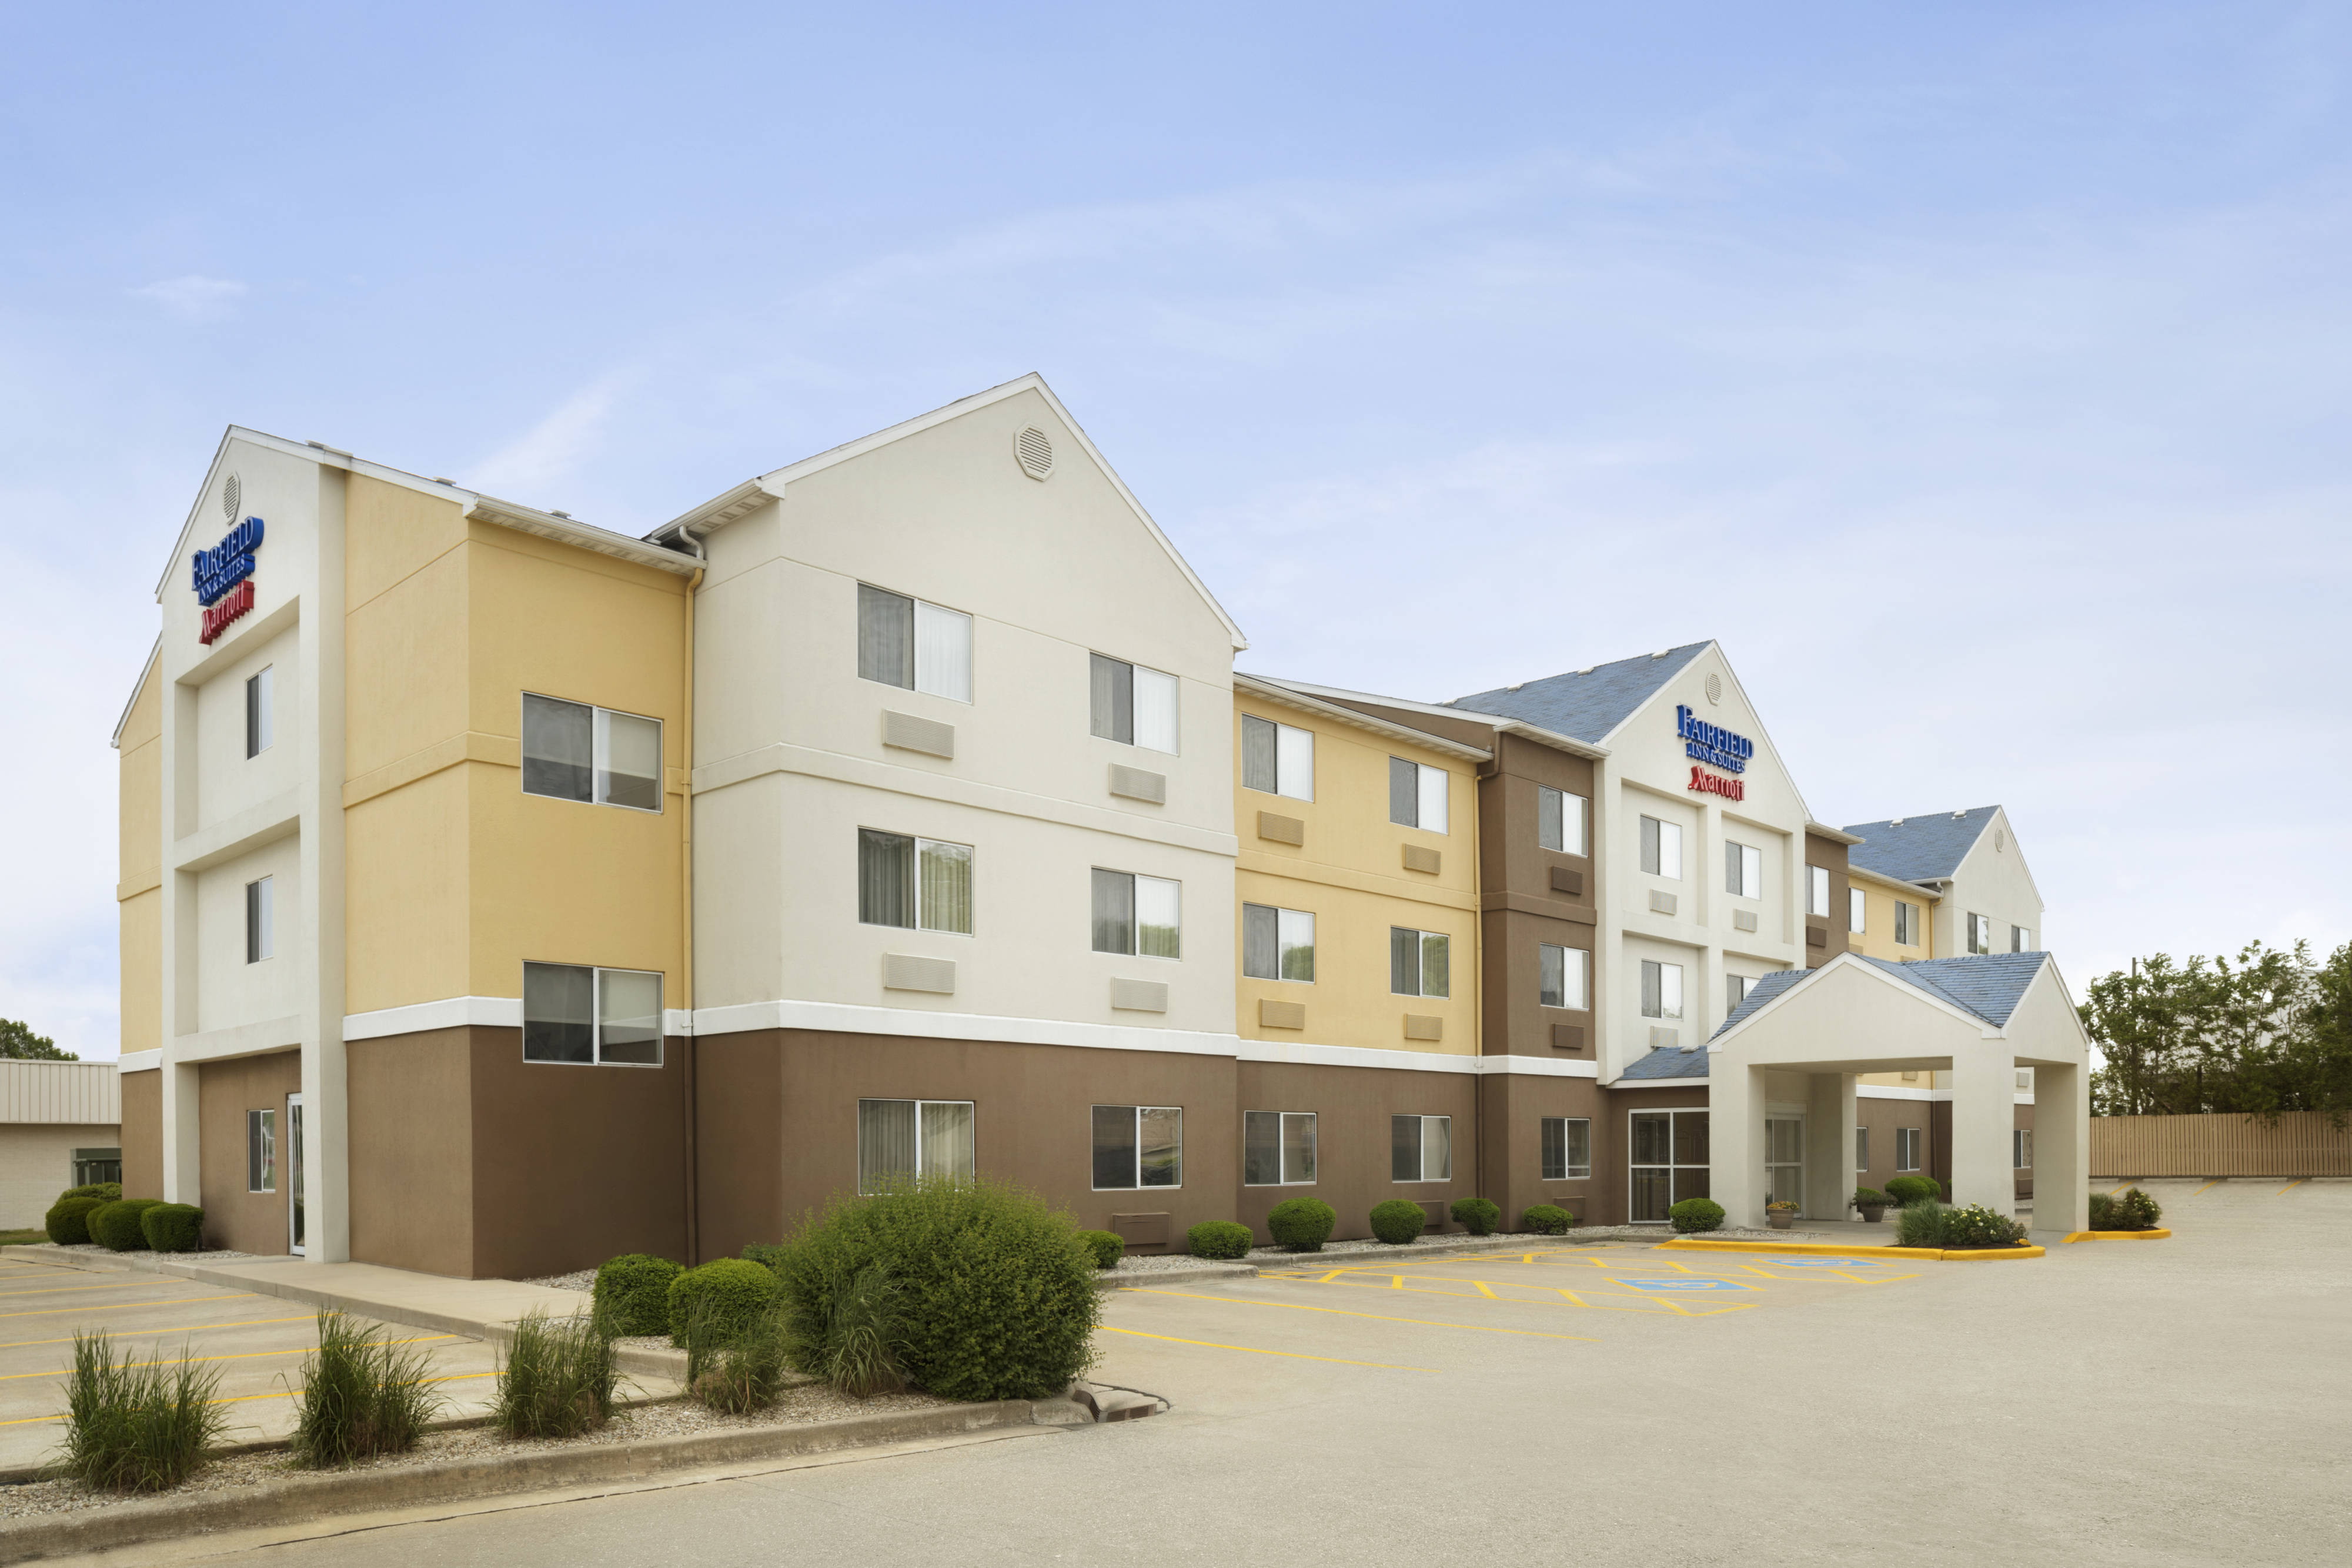 Photo of Fairfield Inn & Suites by Marriott Champaign, Champaign, IL